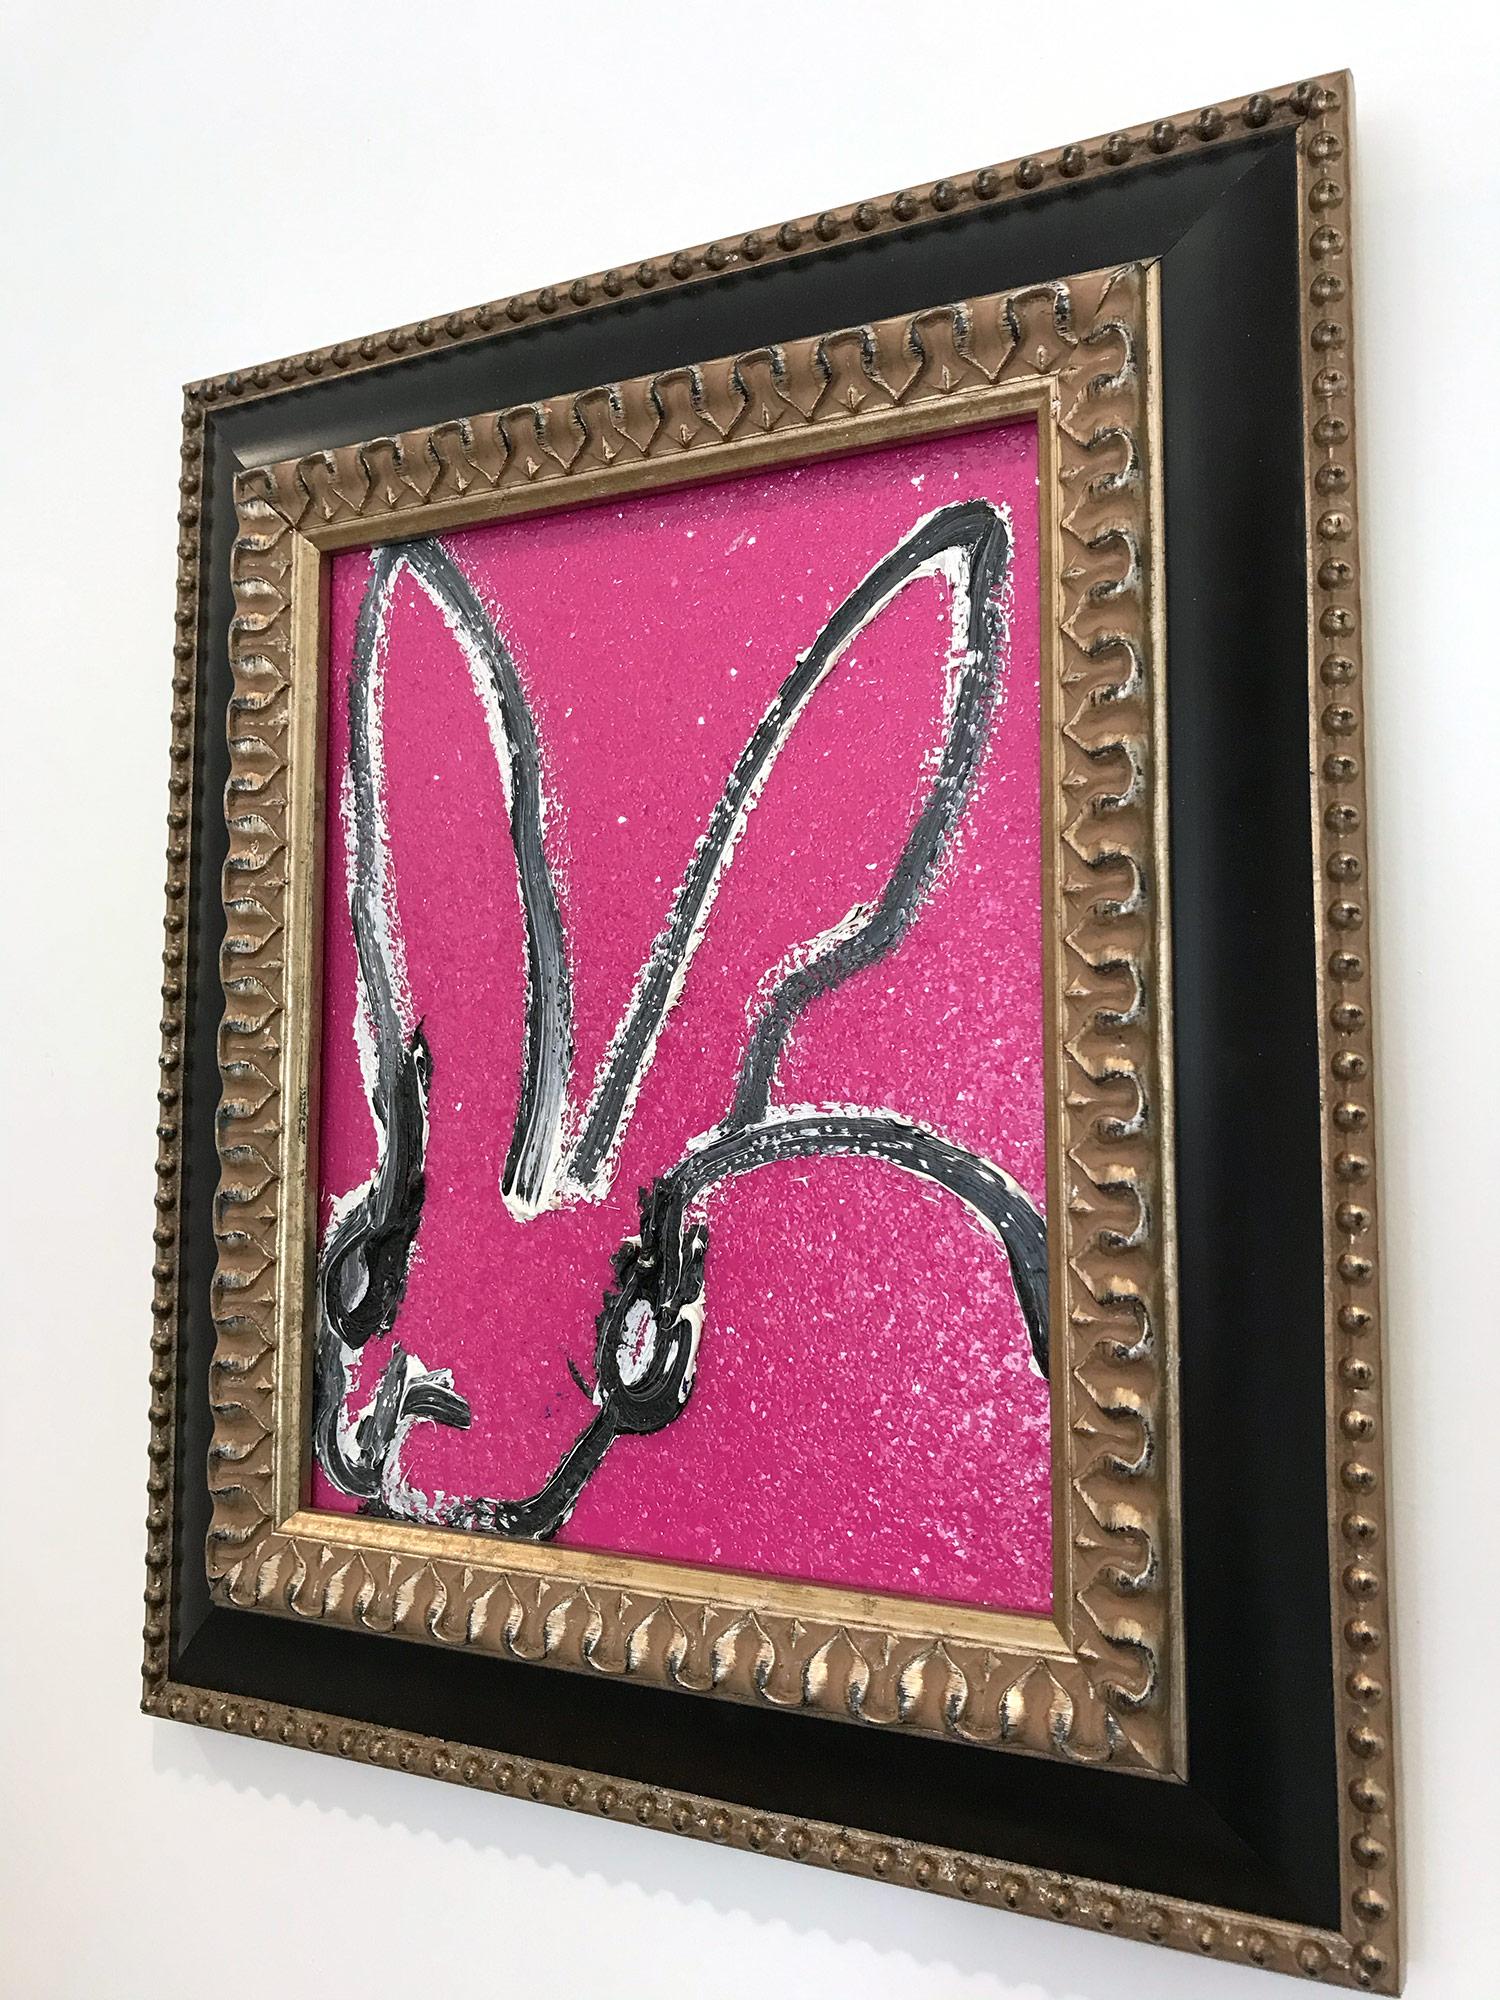 A wonderful composition of one of Slonem's most iconic subjects, Bunnies. This piece depicts a gestural figure of a black and white bunny on a pink background with thick use of paint and diamond dust. It is housed in a wonderful frame. Inspired by